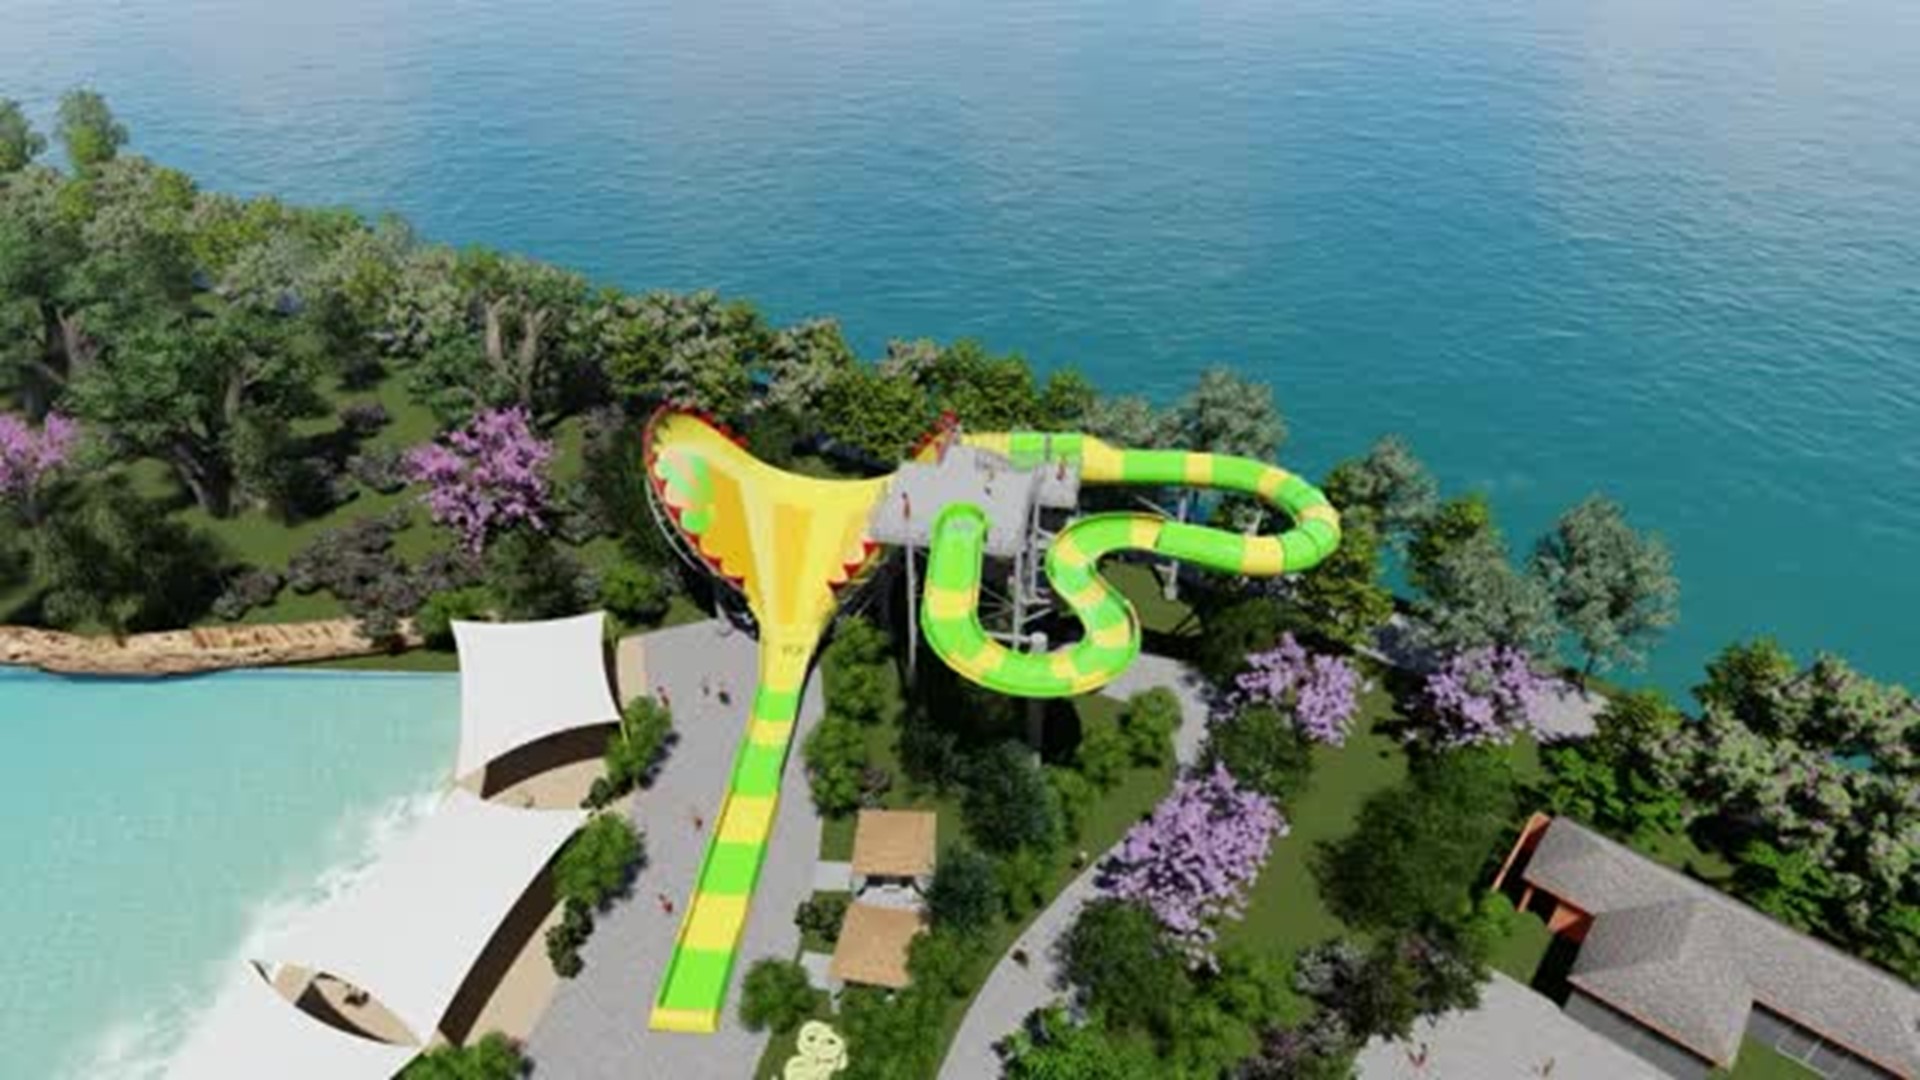 Lake Compounce announces new water slide for 2020